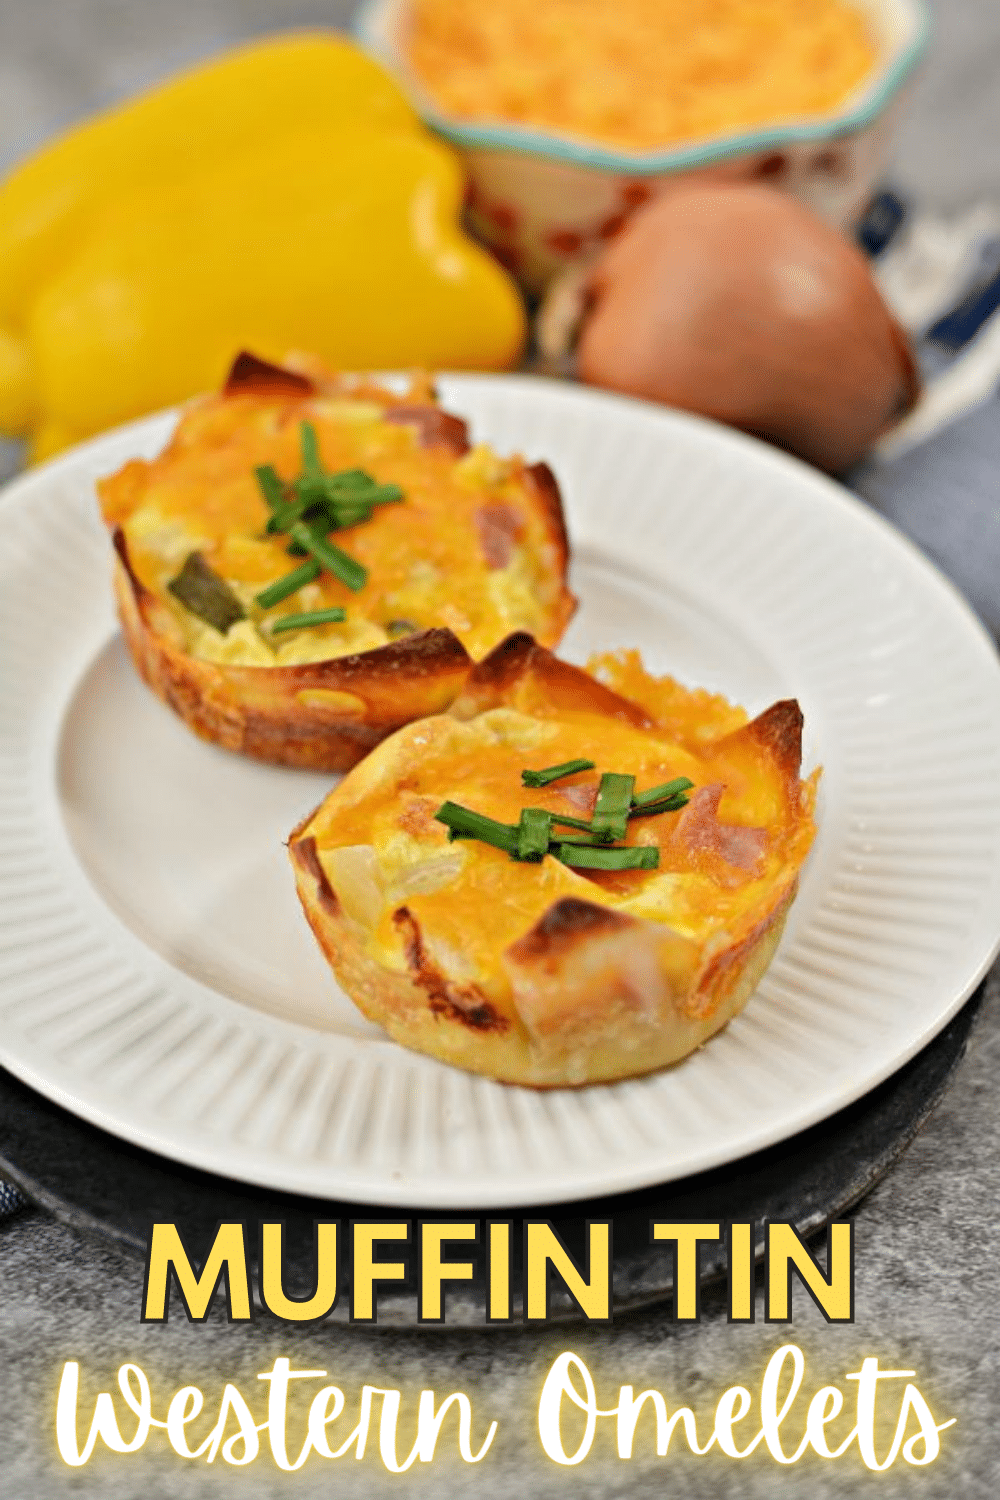 Muffin Tin Western Omelets are a quick and easy breakfast recipe that also works great for brunch or dinner. This recipe is easy to double for a crowd. #omelets #muffintinrecipes #breakfast via @wondermomwannab